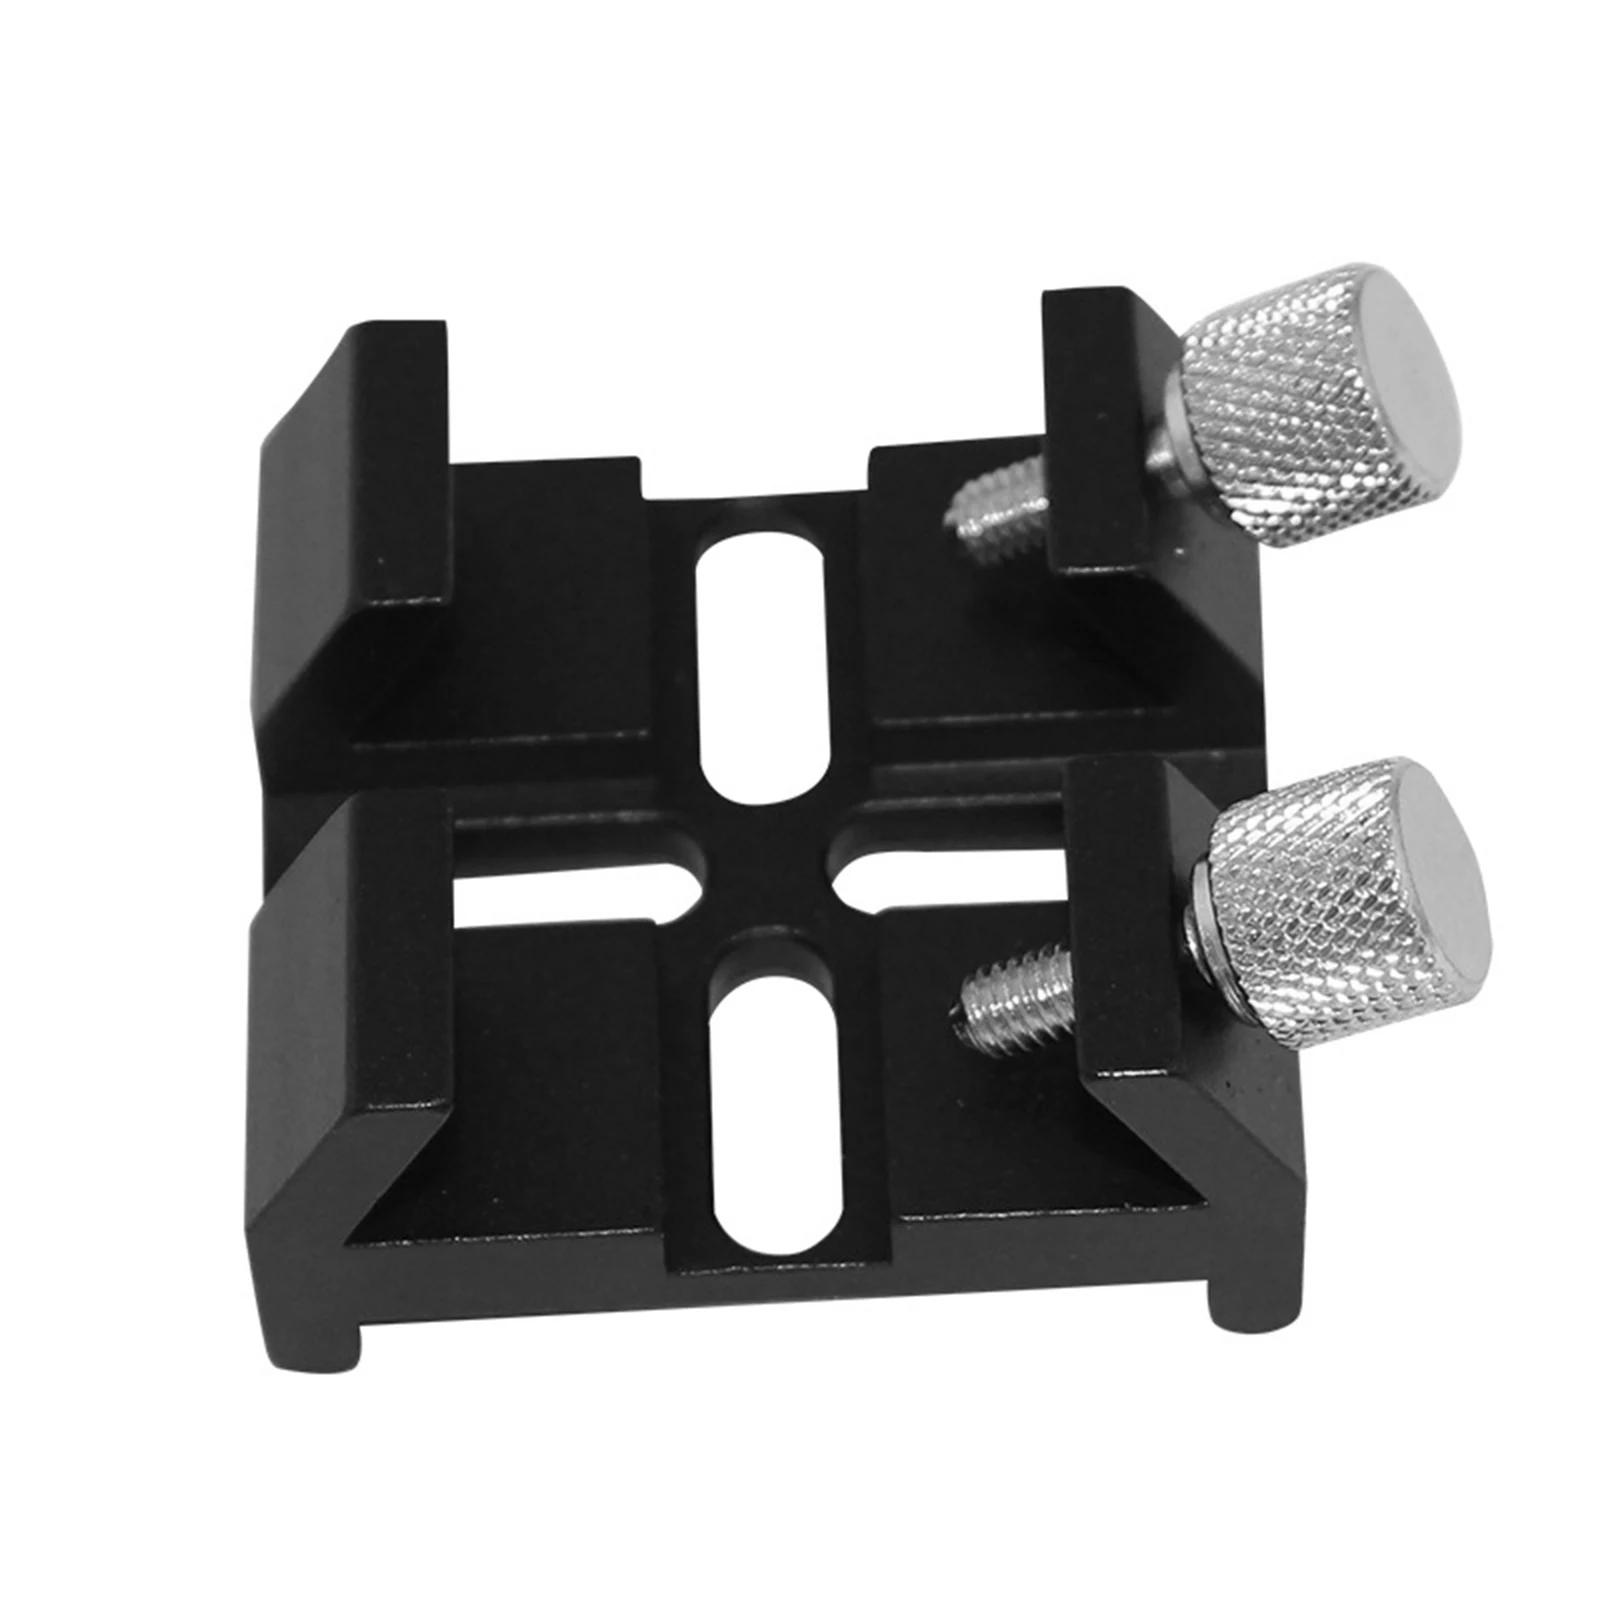 

Small Dovetail Plate with Locking Screw Quick-Connect Finderscope Guide Scope Adapter Bracket for Astronomical Telescope